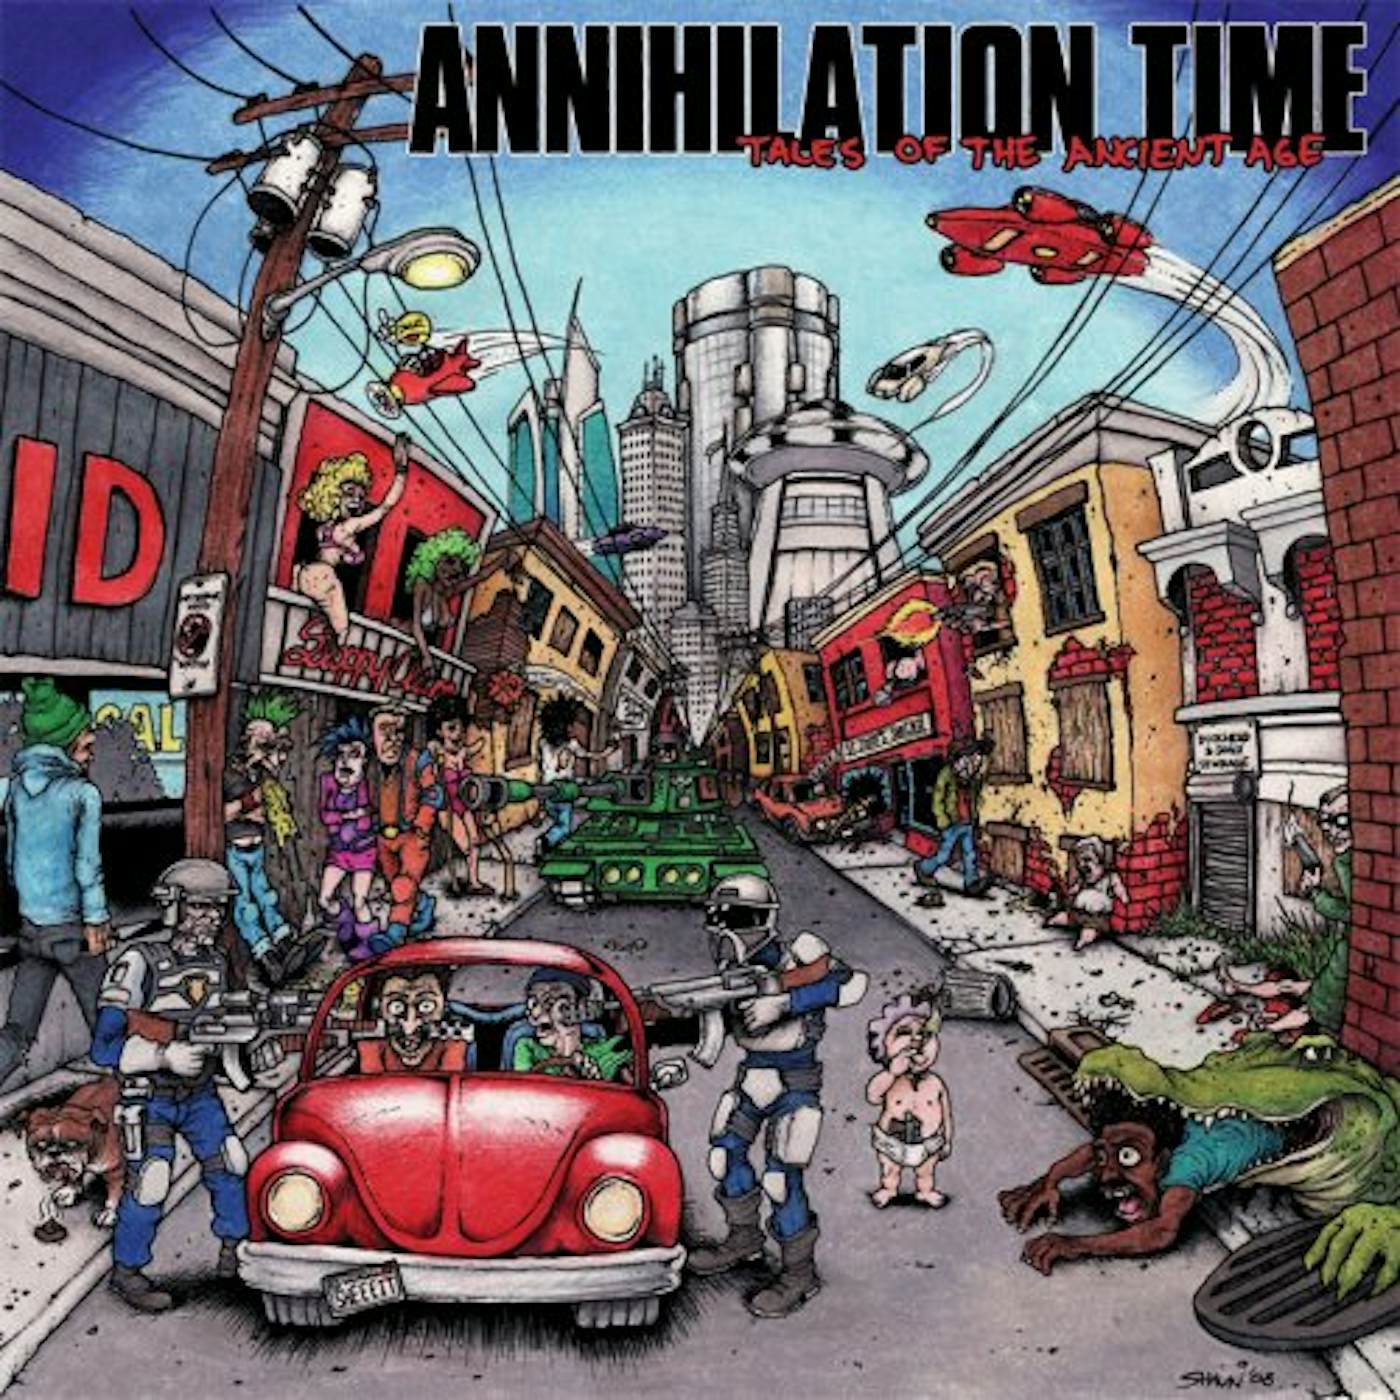 Annihilation Time TALES OF THE ANCIENT AGE CD